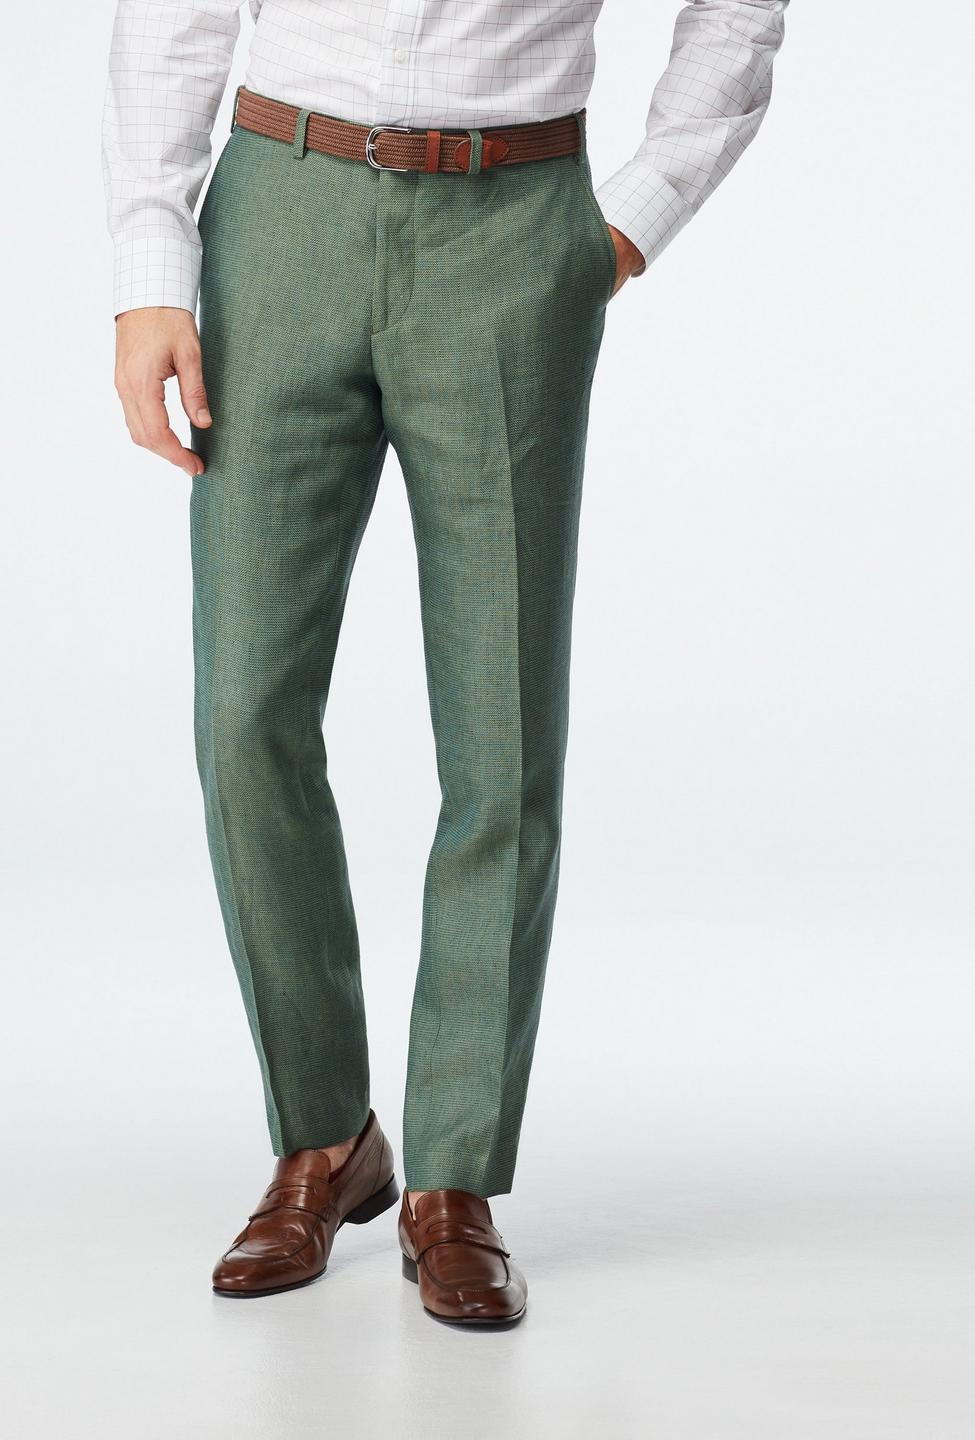 Green pants - Sailsbury Solid Design from Seasonal Indochino Collection